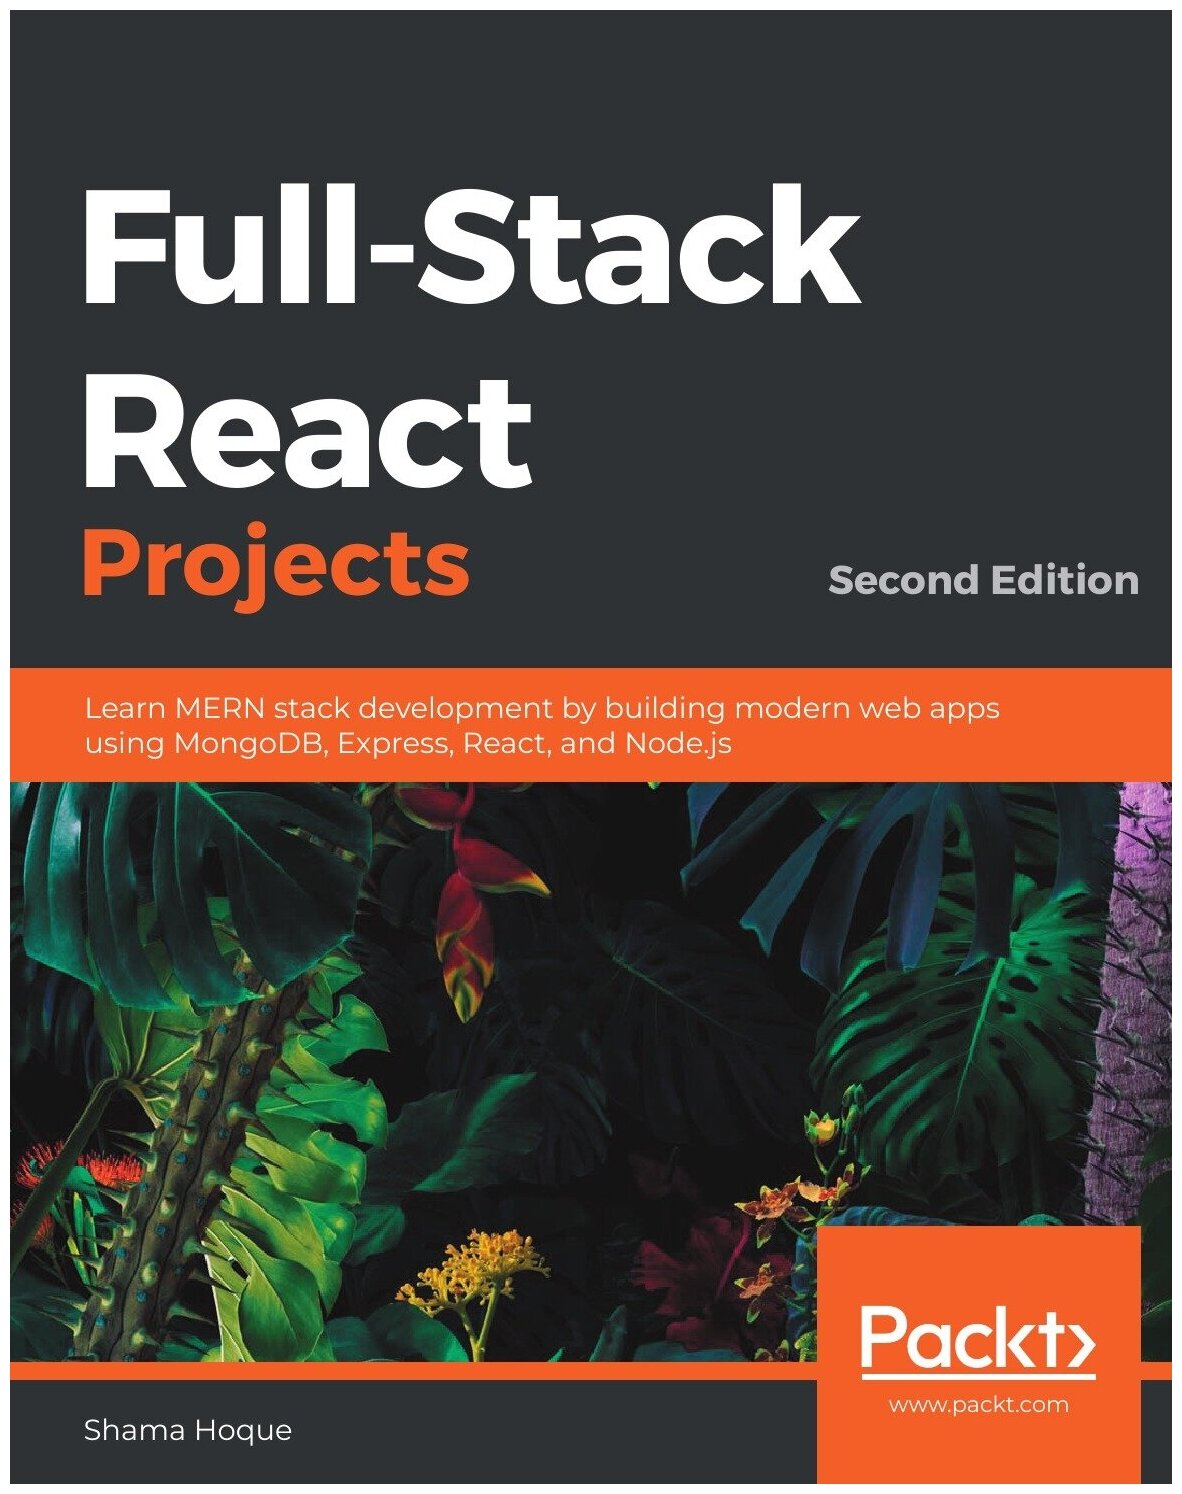 Full-Stack React Projects - Second Edition. Learn MERN stack development by building modern web apps using MongoDB, Express, React, and Node.js